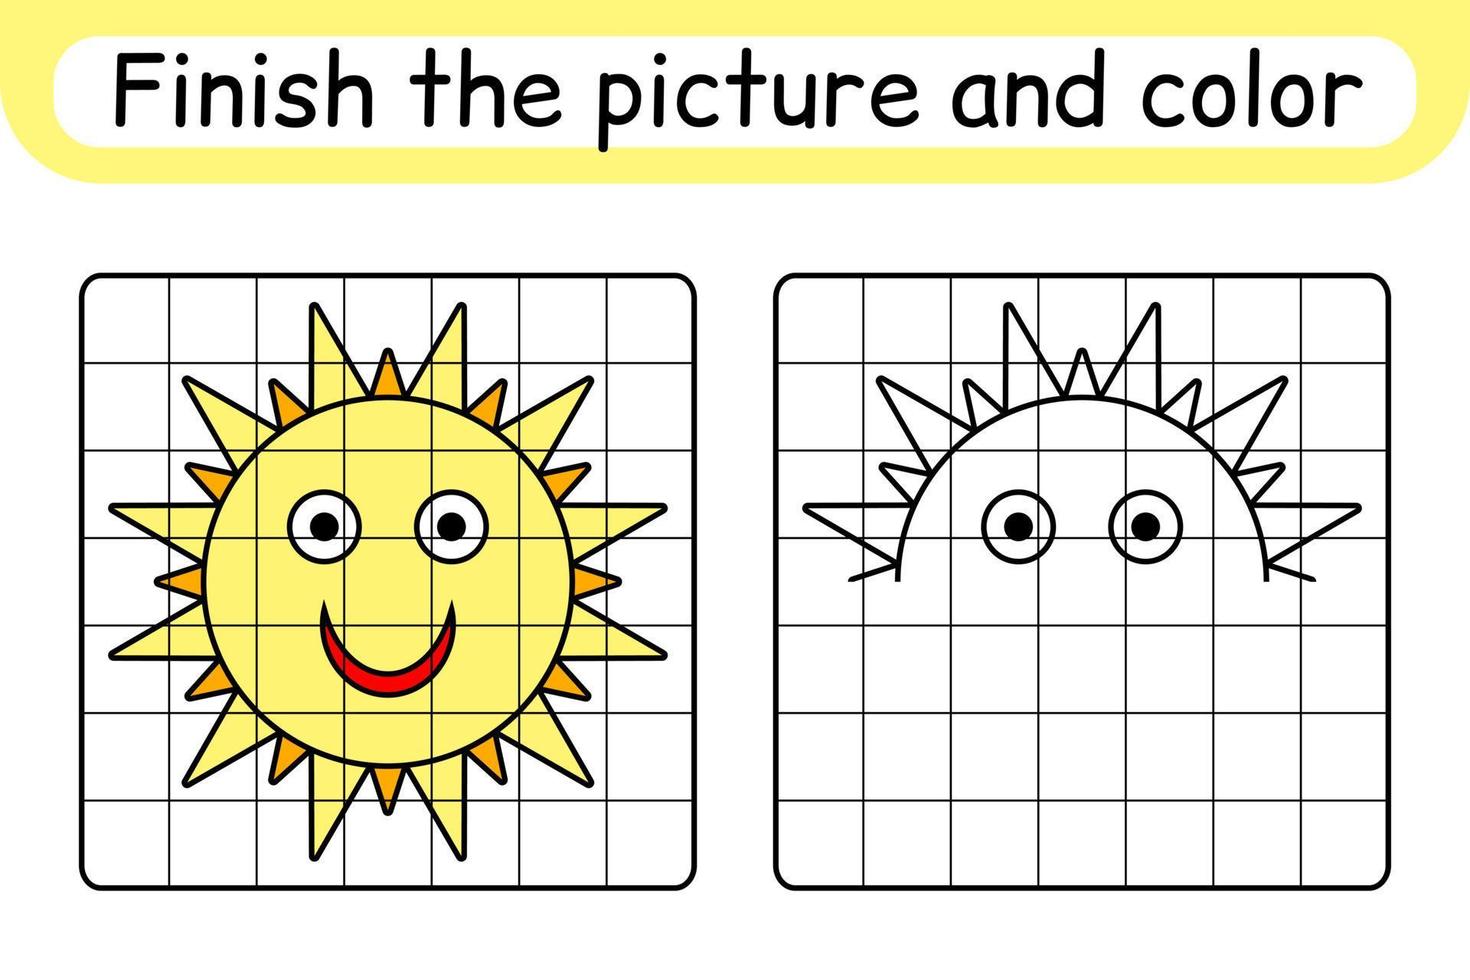 Complete the picture sun. Copy the picture and color. Finish the image. Coloring book. Educational drawing exercise game for children vector